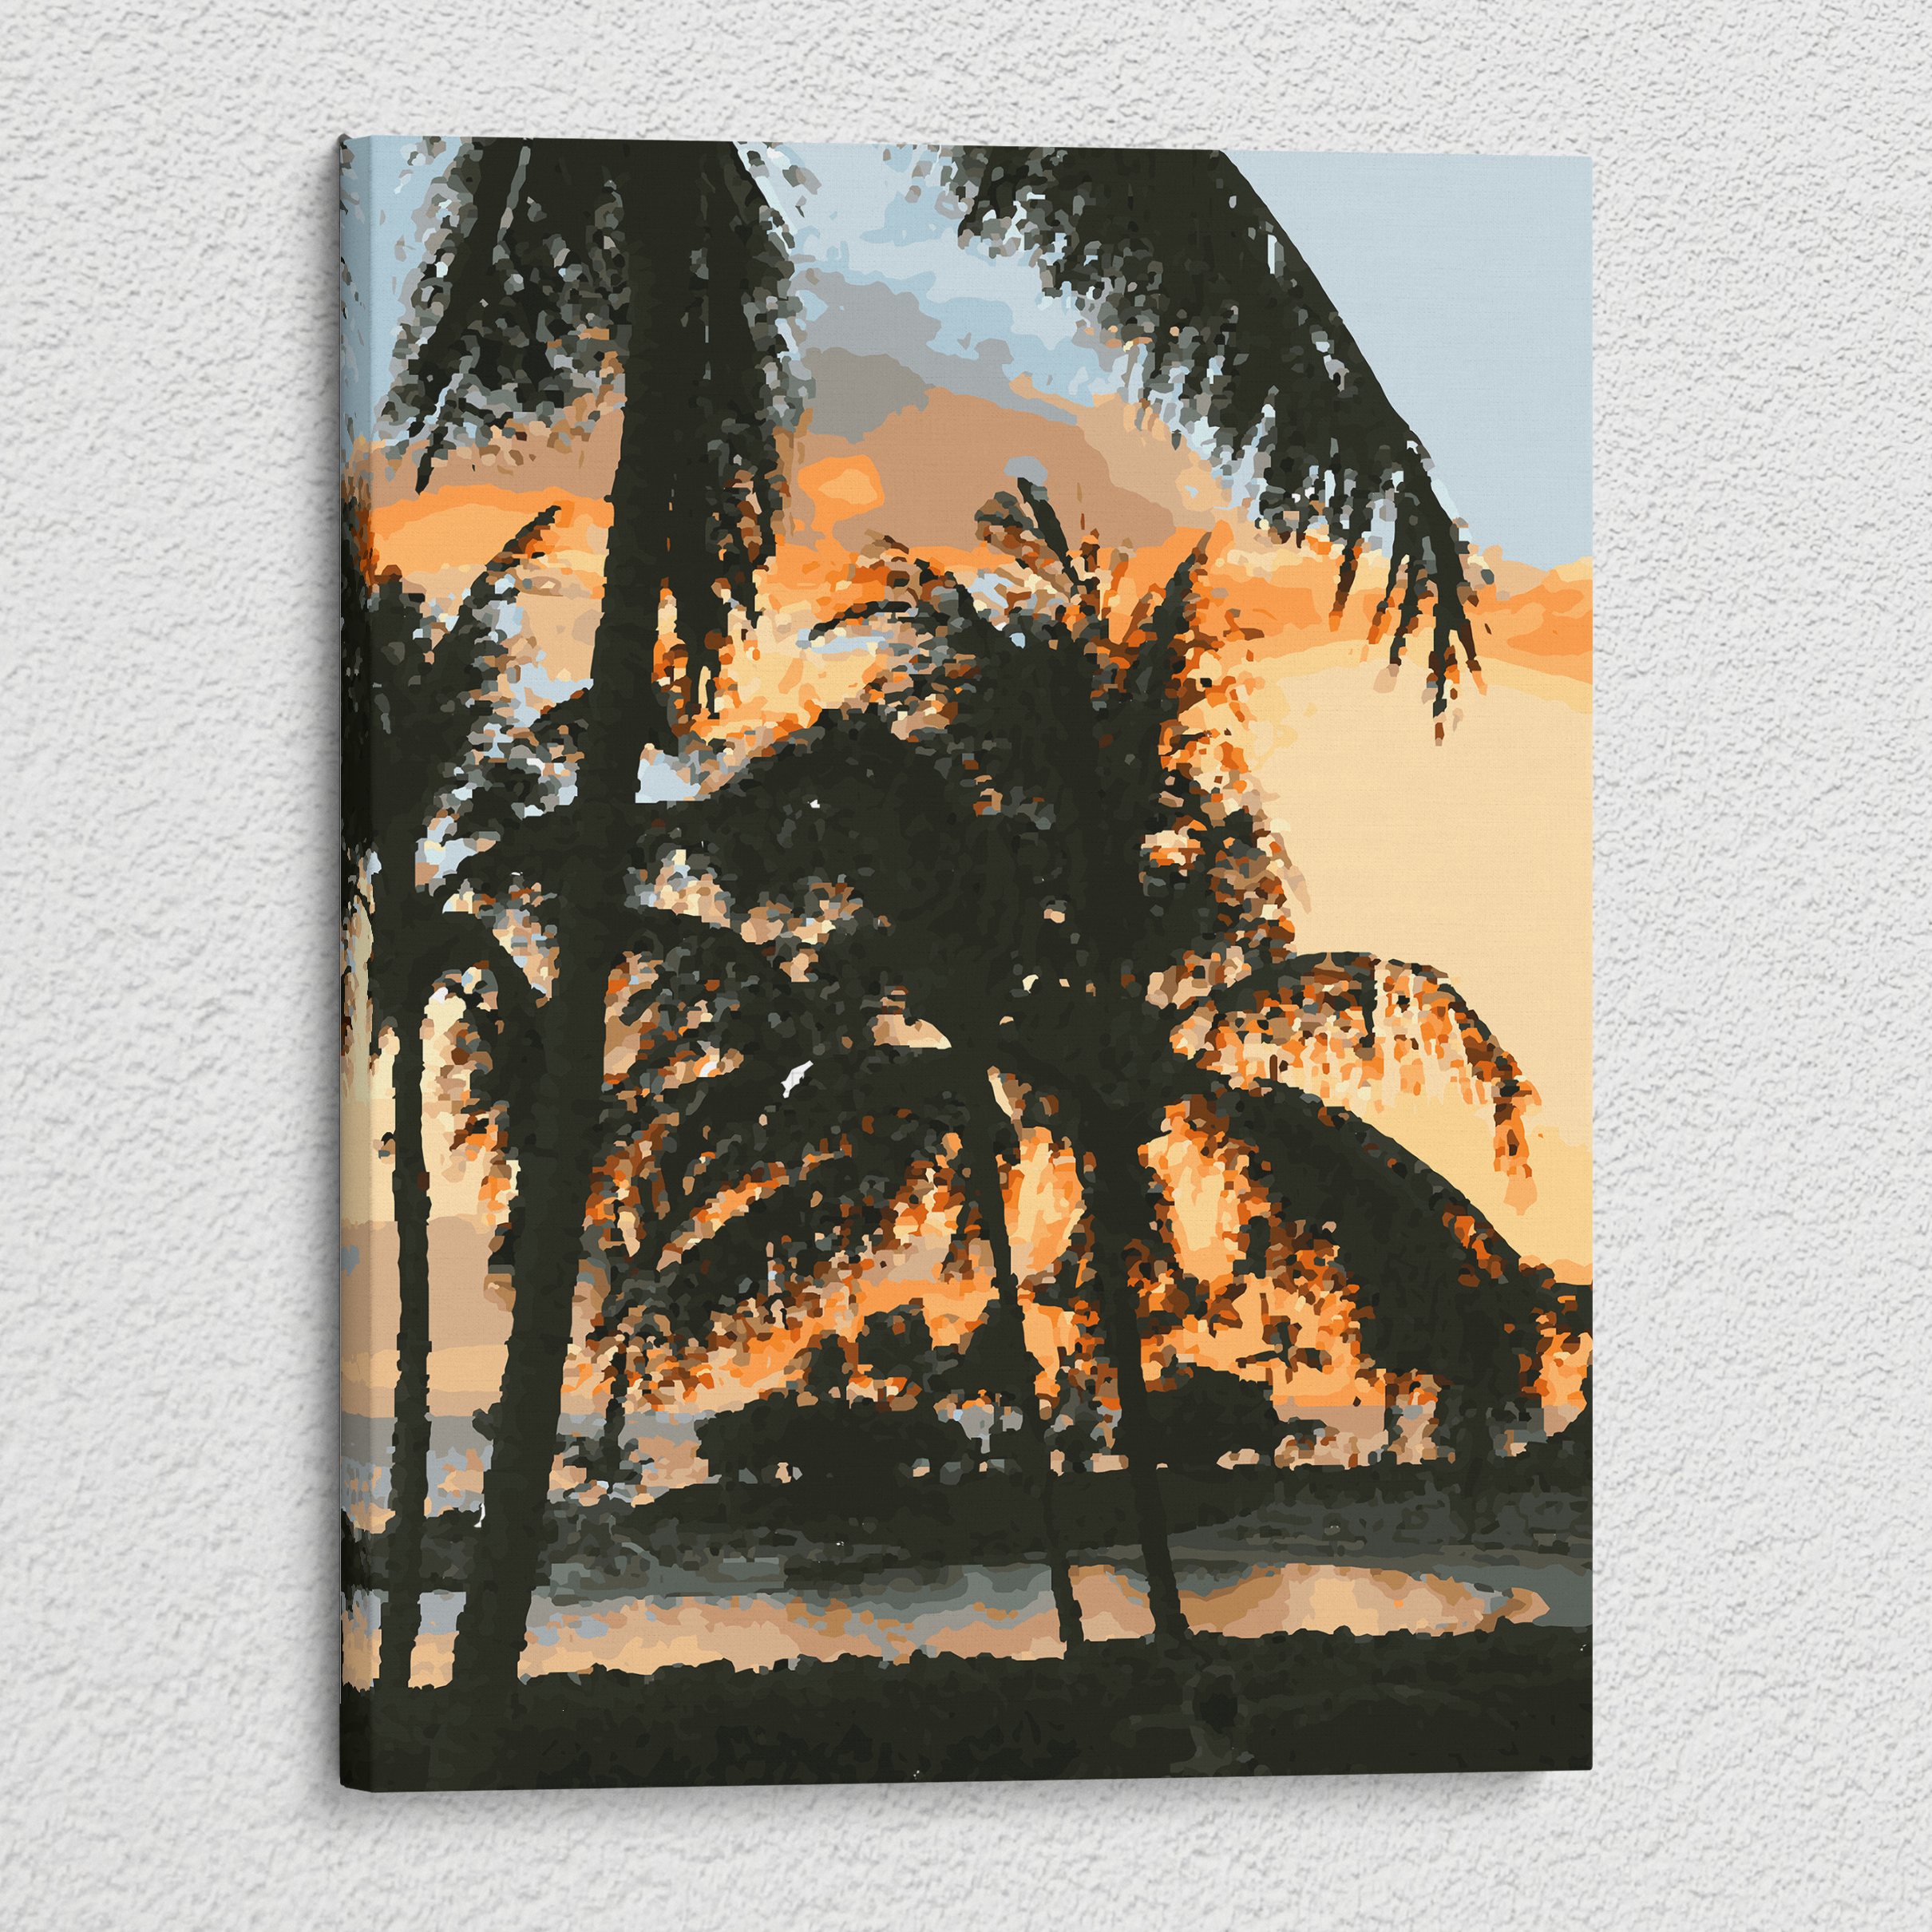 Sunset in Hawaii - Paint By Numbers Kit